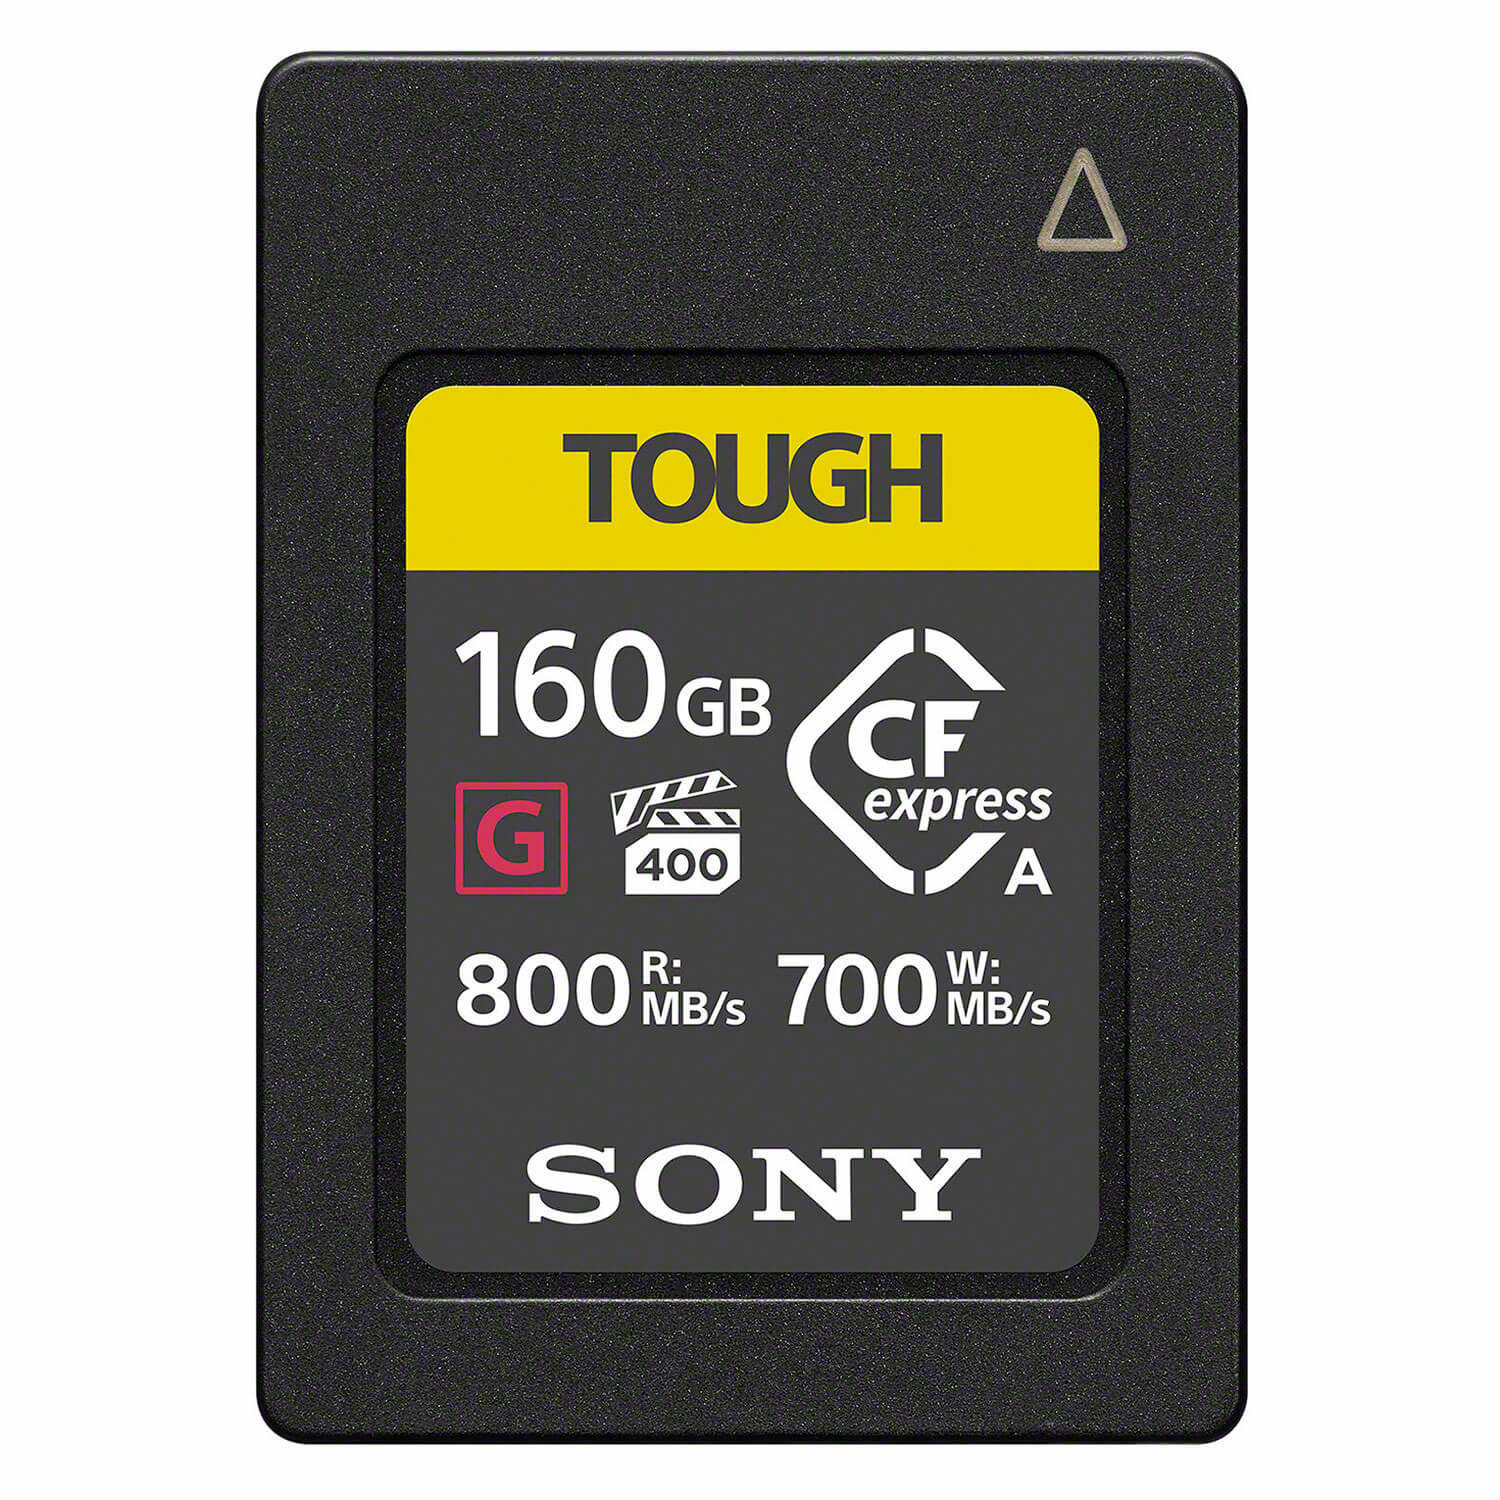 Sony 160GB Tough CFexpress Type A 800MB/s geheugenkaart